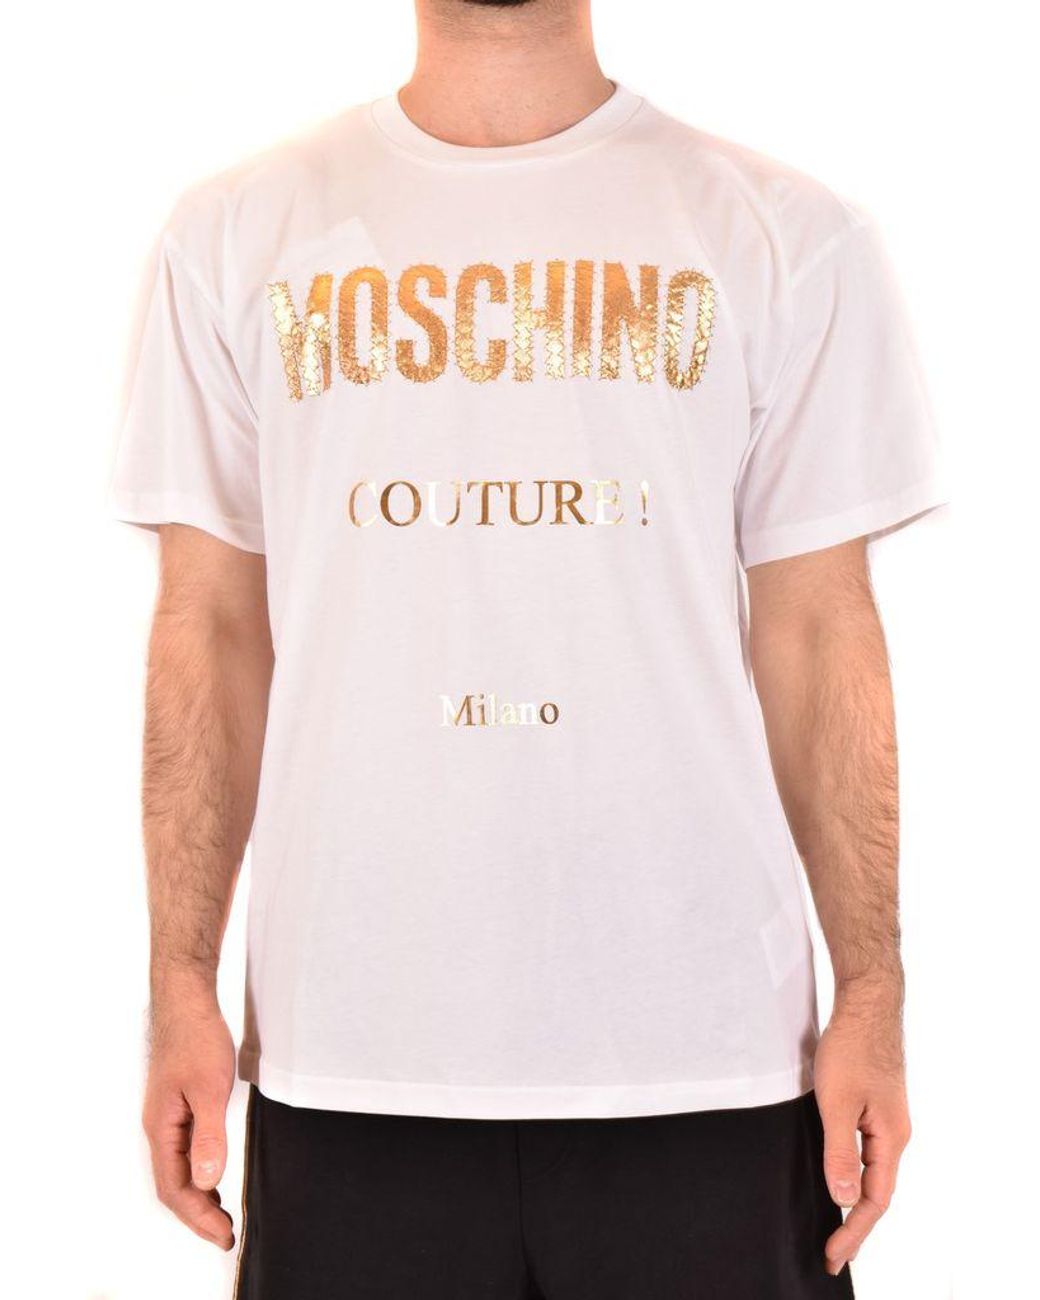 Moschino Cotton T-shirts in White for Men - Lyst